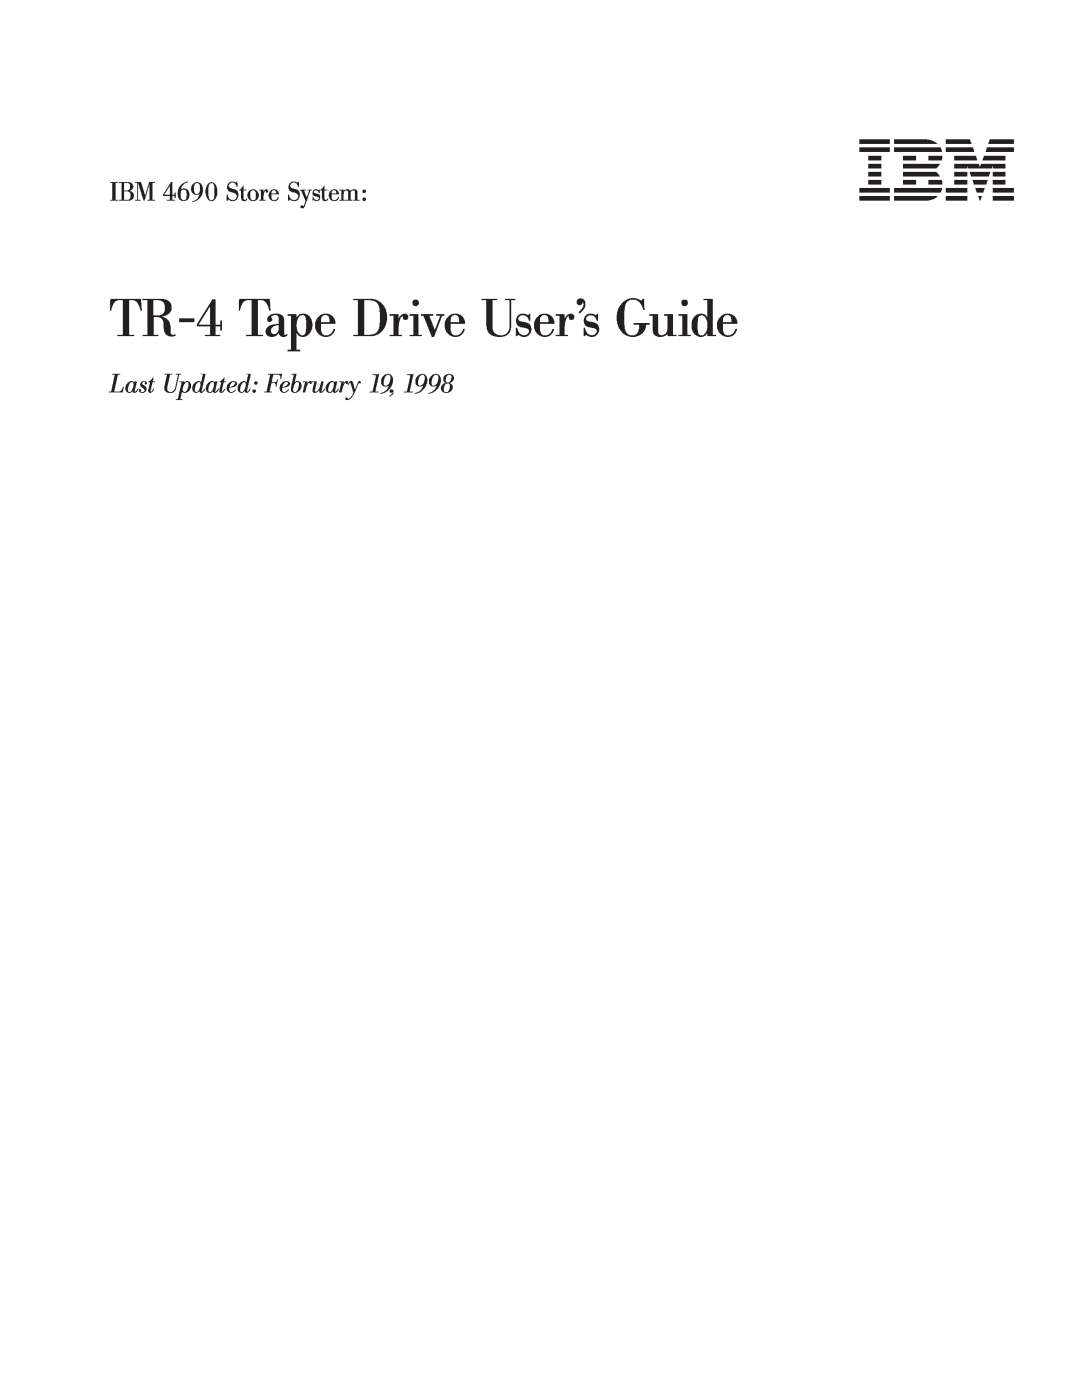 IBM manual TR-4Tape Drive Users Guide, IBM 4690 Store System, Last Updated February 